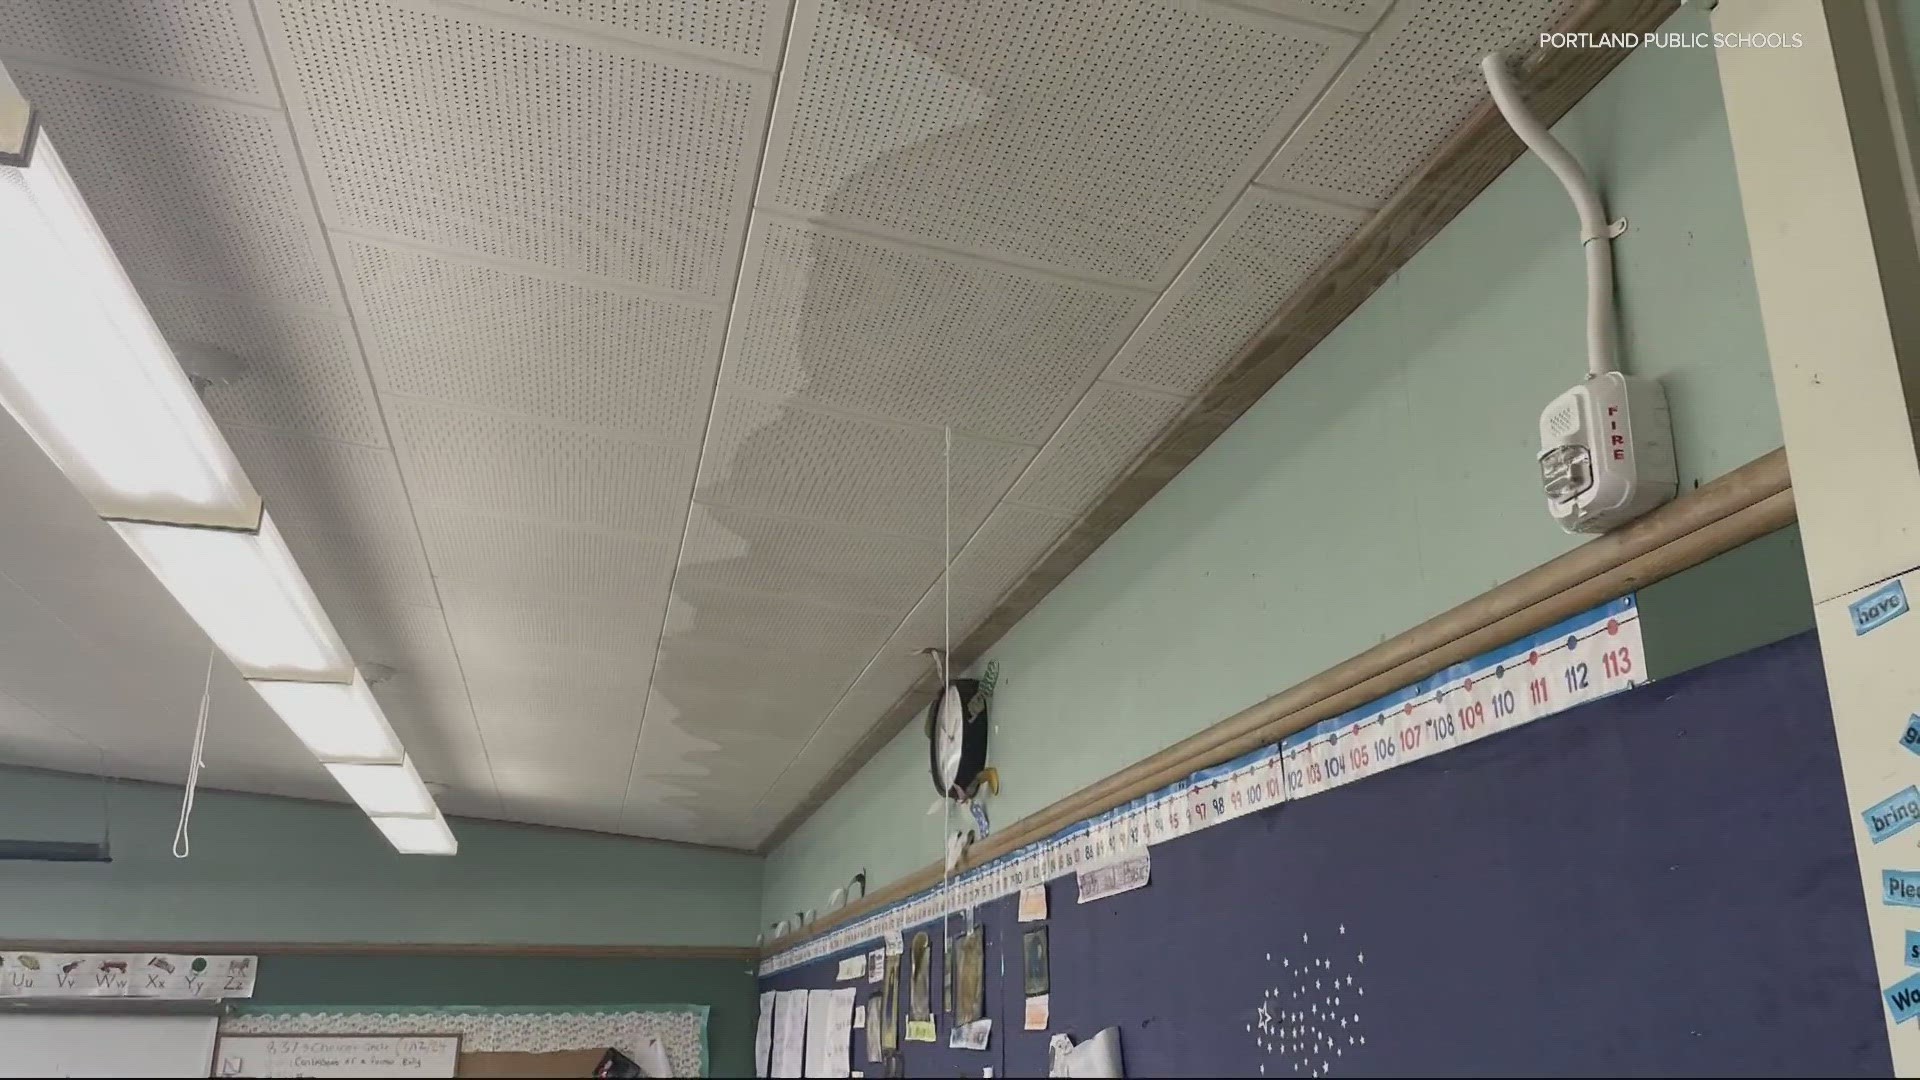 Markham Elementary School in Portland will not reopen at the start of the new school year due to extensive damage caused by January’s winter storms, district said.